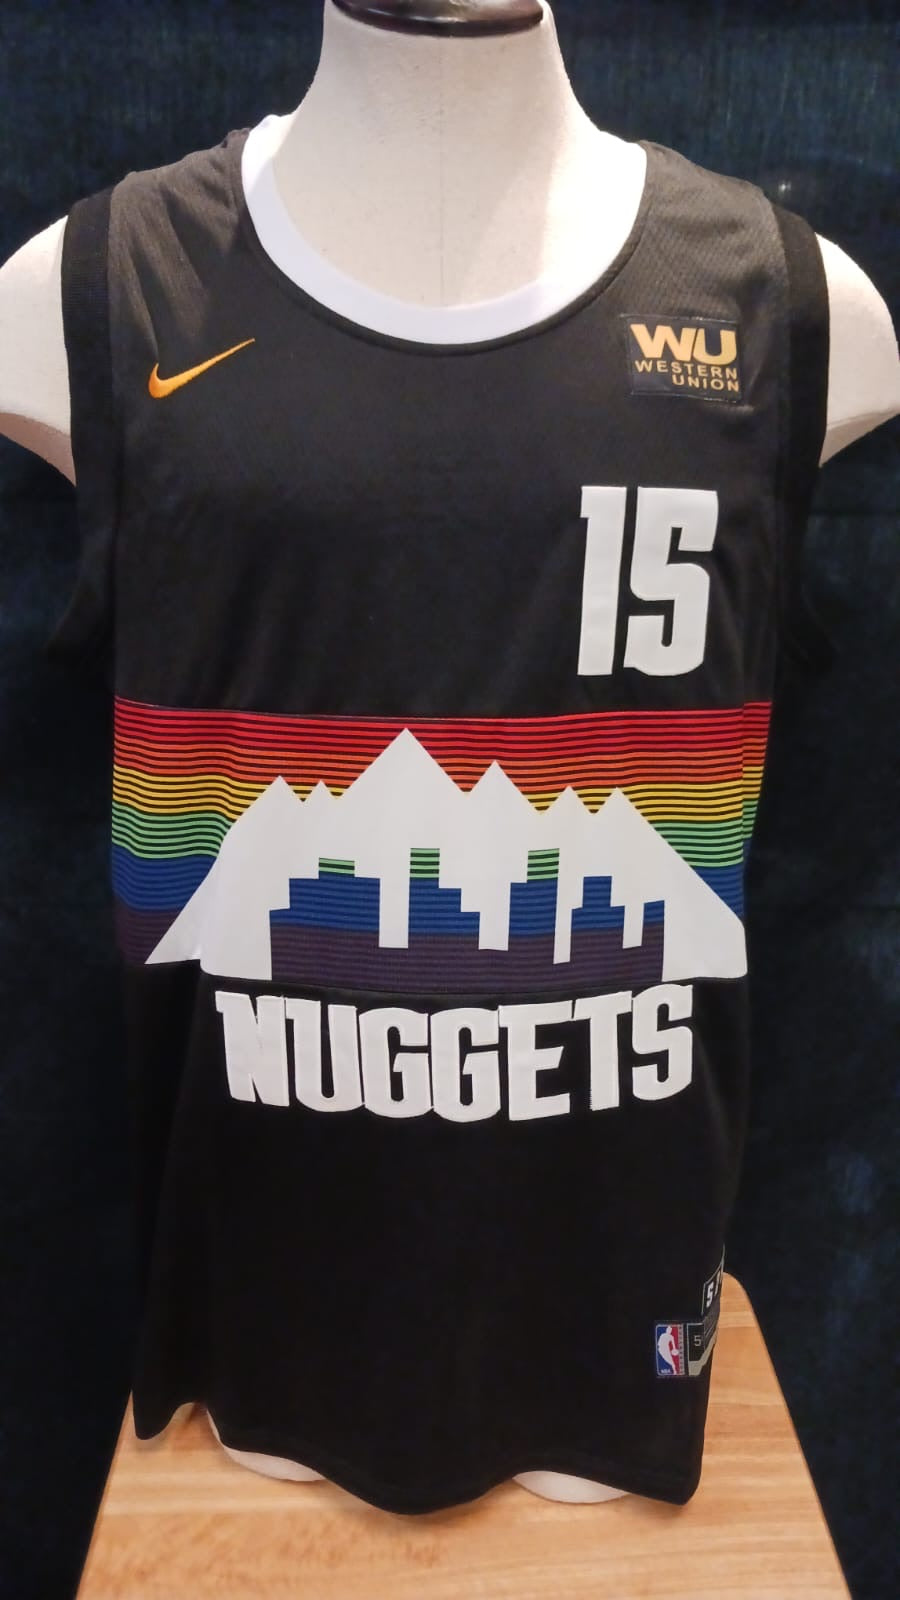 What is Western Union on the Denver Nuggets jerseys?